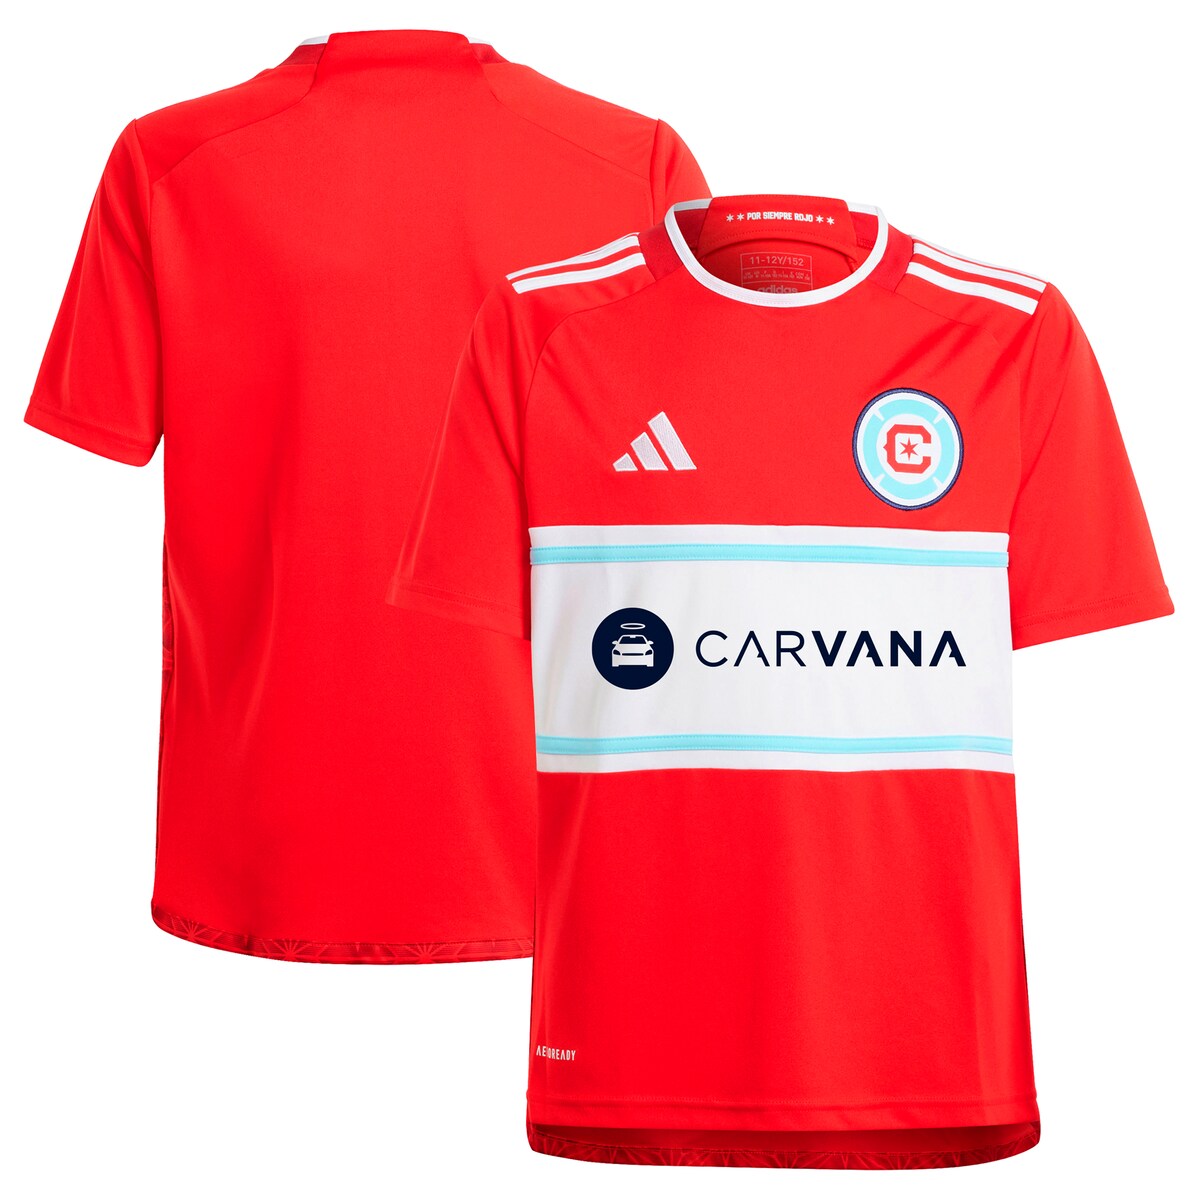 MLS VJSEt@CA vJ jtH[ AdidasiAfB_Xj [X bh (S24/25 CHICAGO FIRE HOME JERSEY YOUTH)